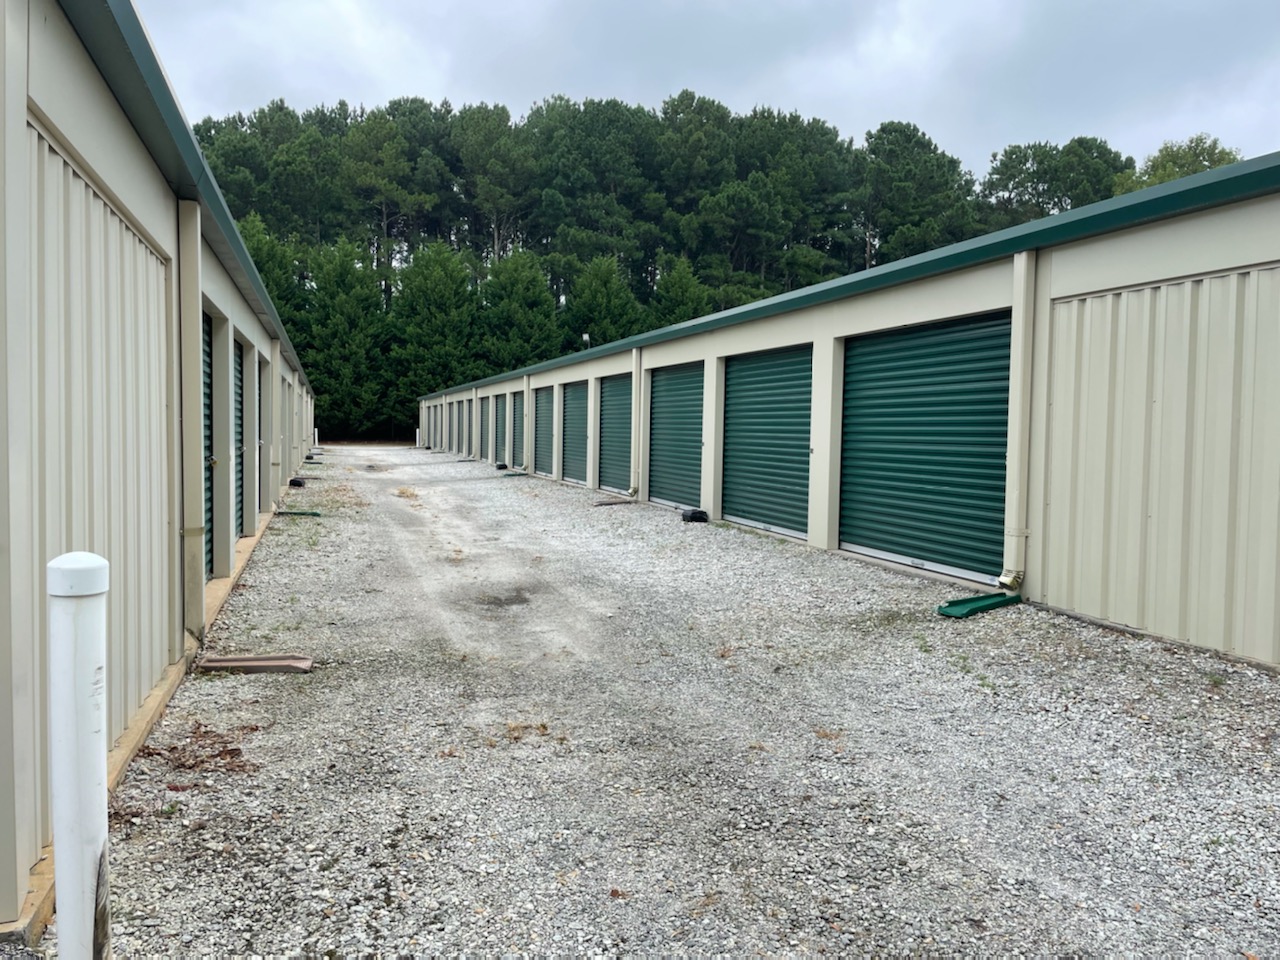 wide drive aisles for easy unloading and packing in loganville, ga